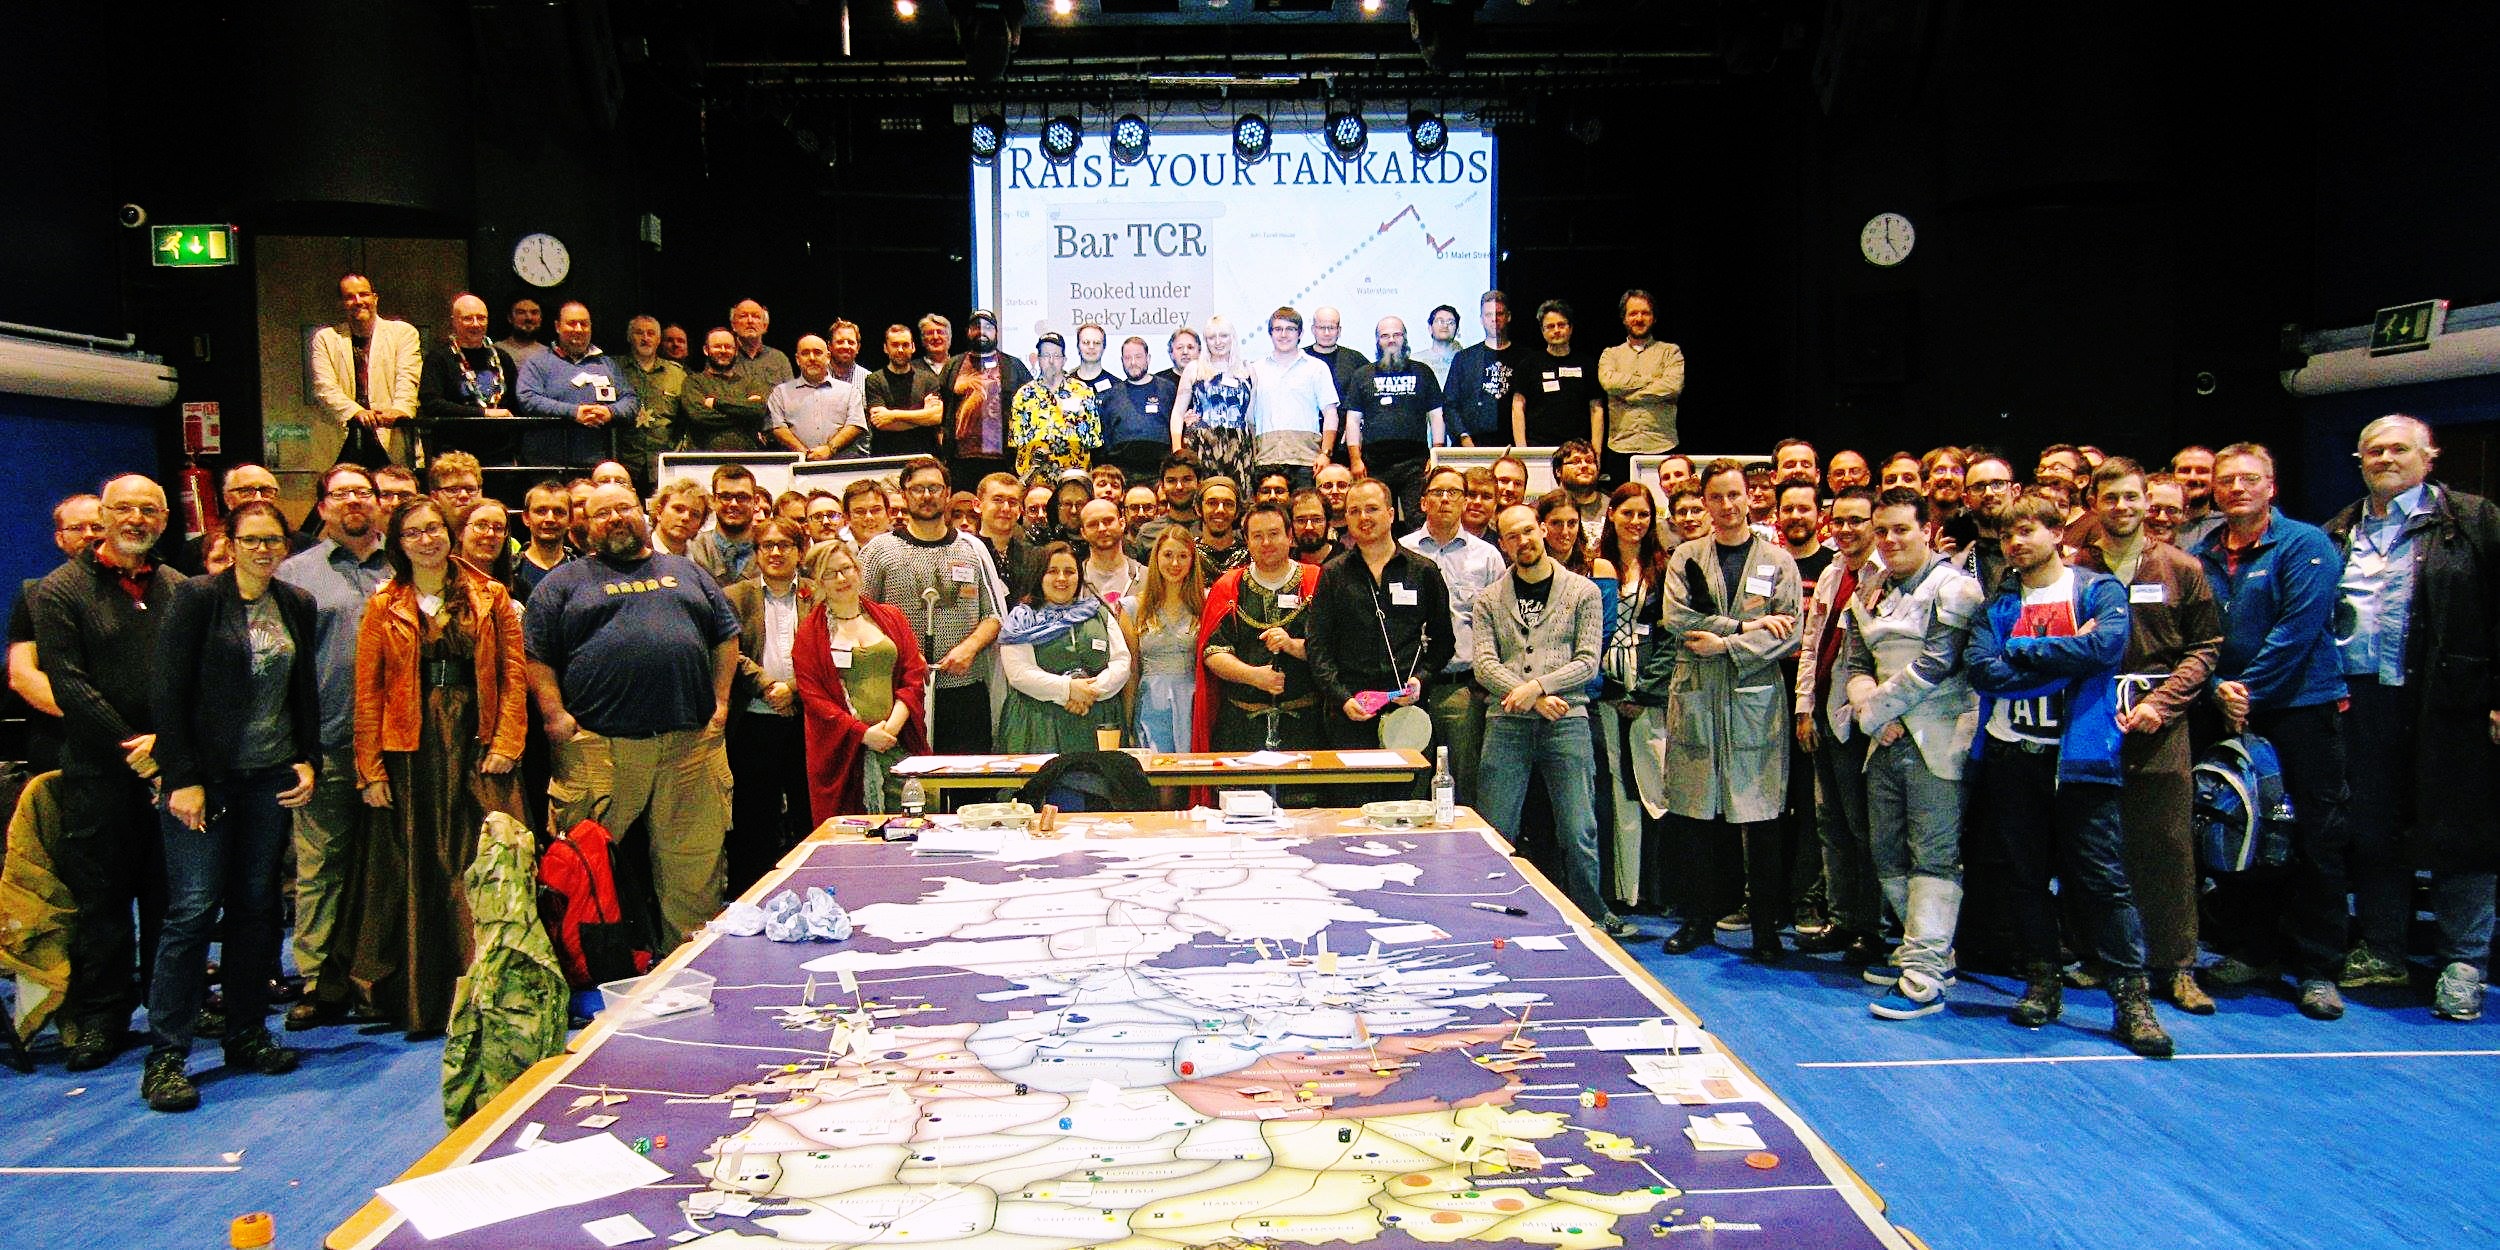 Group photo at Everybody Dies - Goodbye Everybody Dies the Megagame by BeckyBecky Blogs